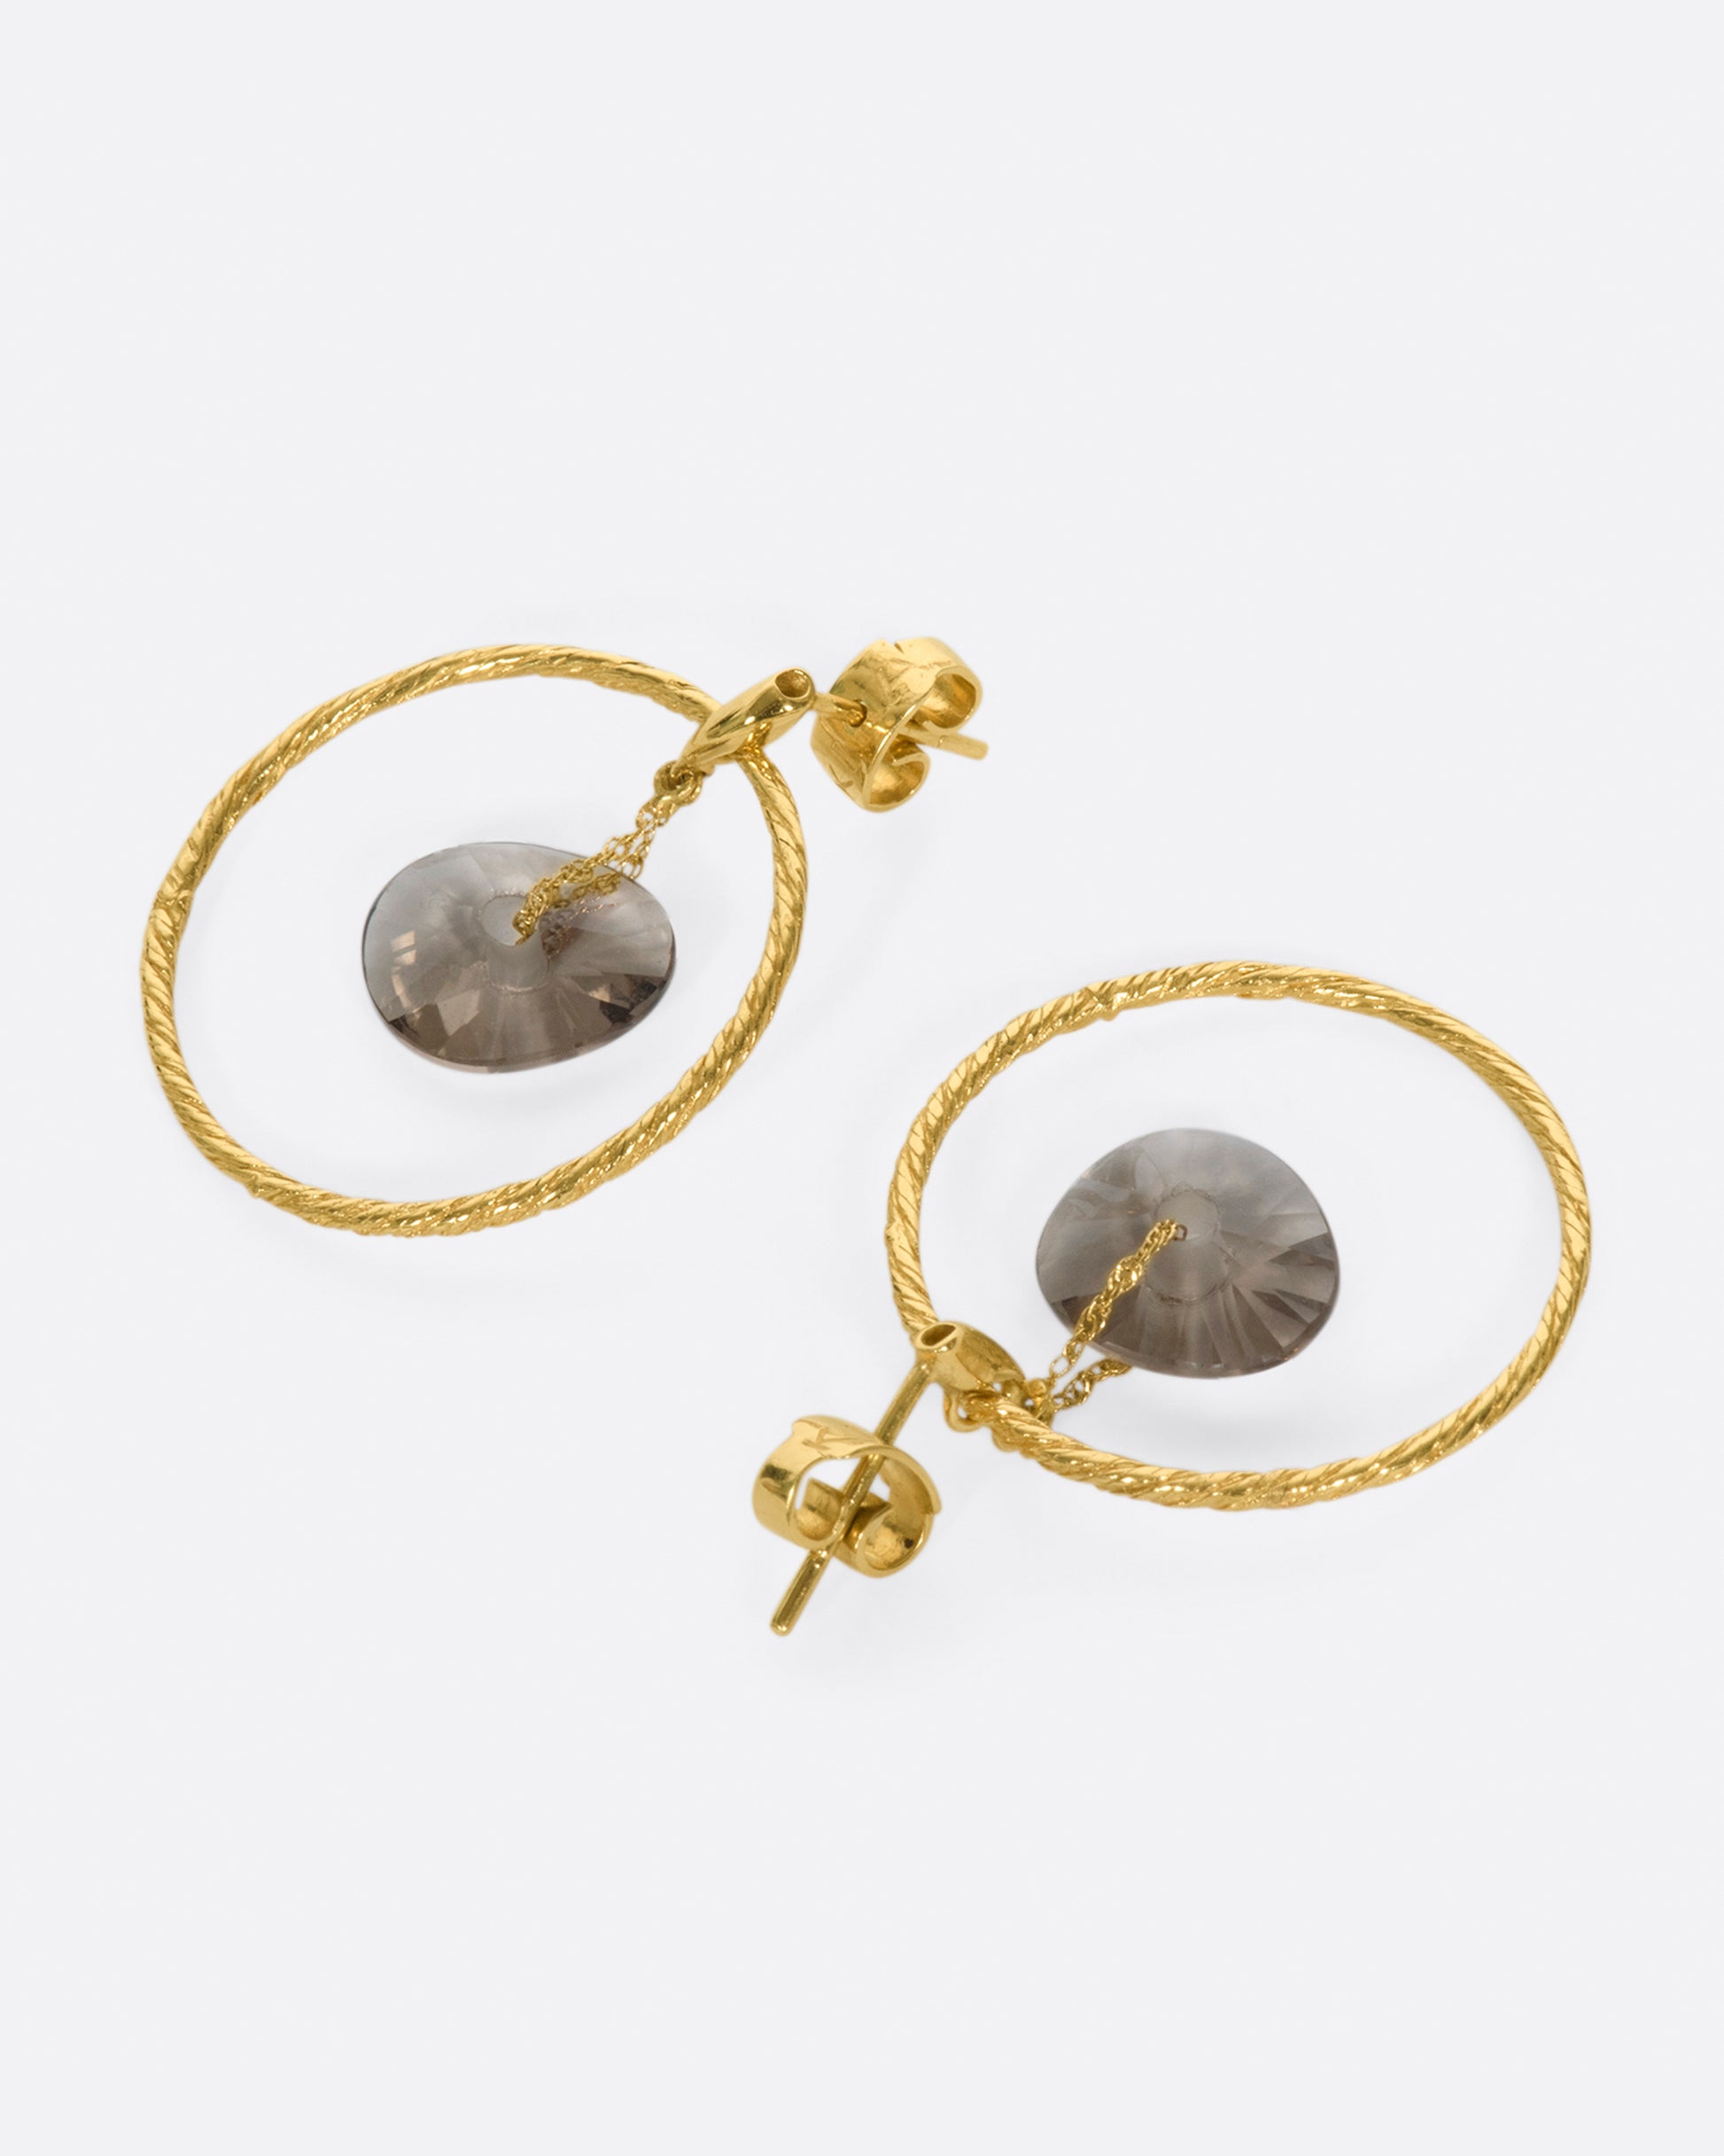 A pair of circular yellow gold wire earrings with smokey quartz donut-shaped beads hanging freely in the middle, shown laying flat.